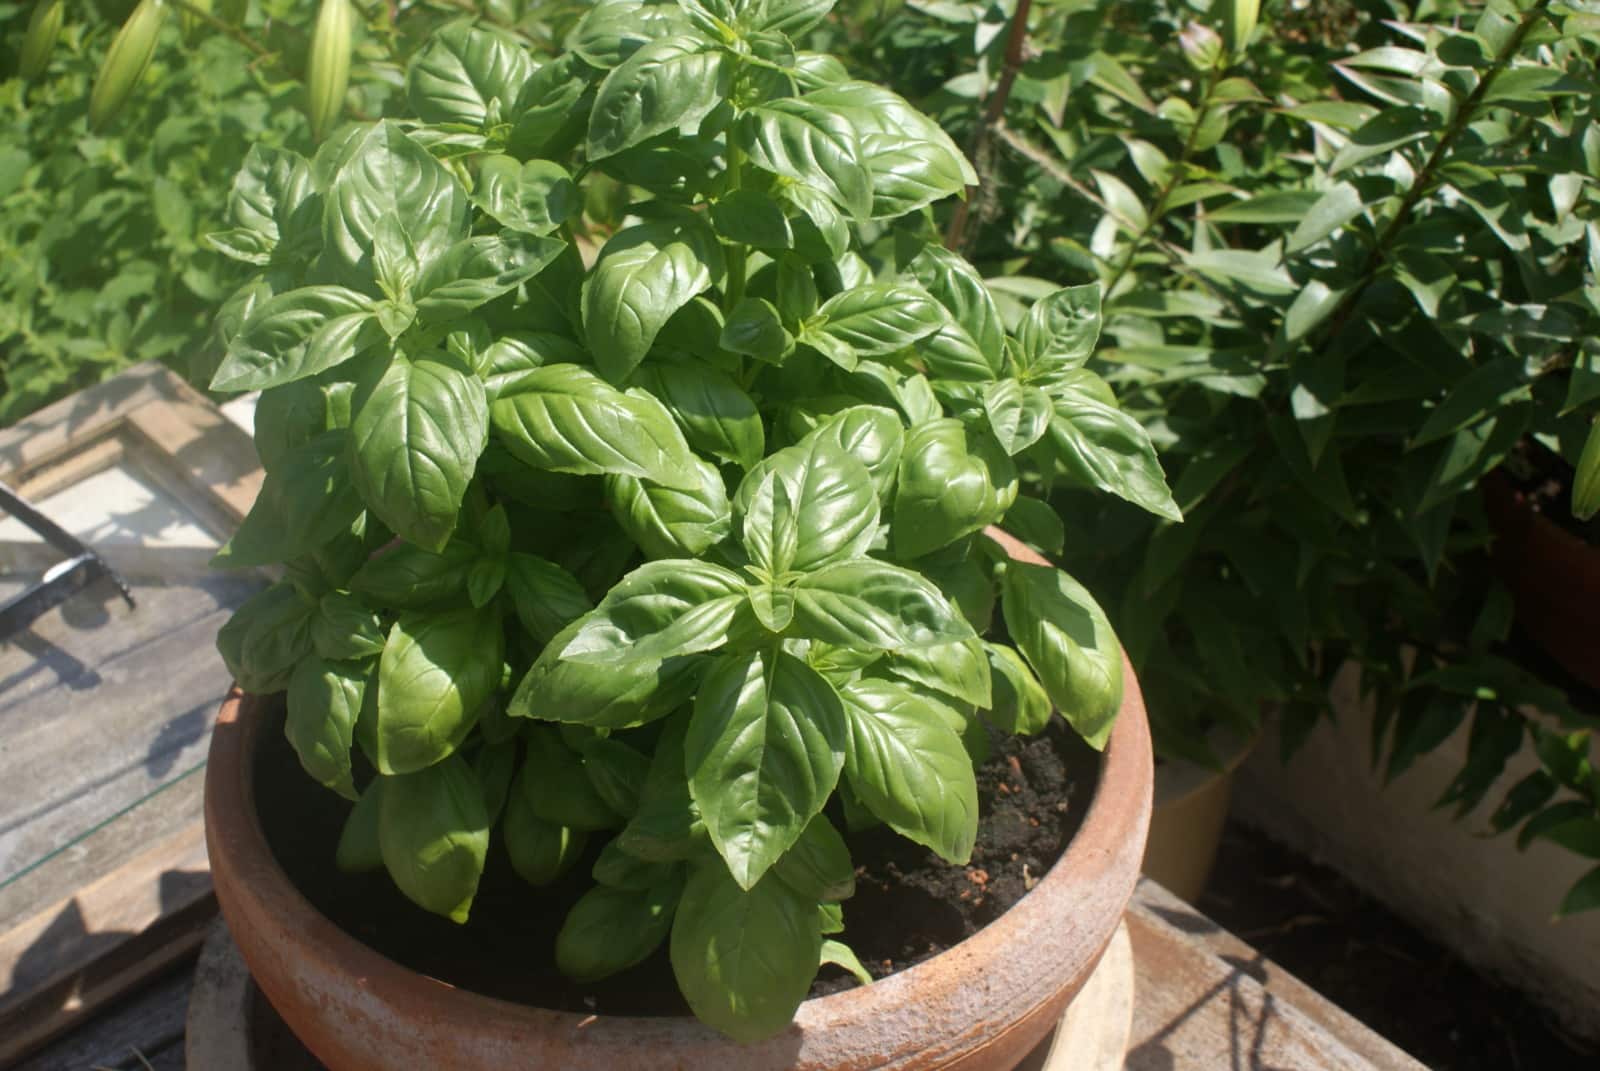 A basil plant in a pot